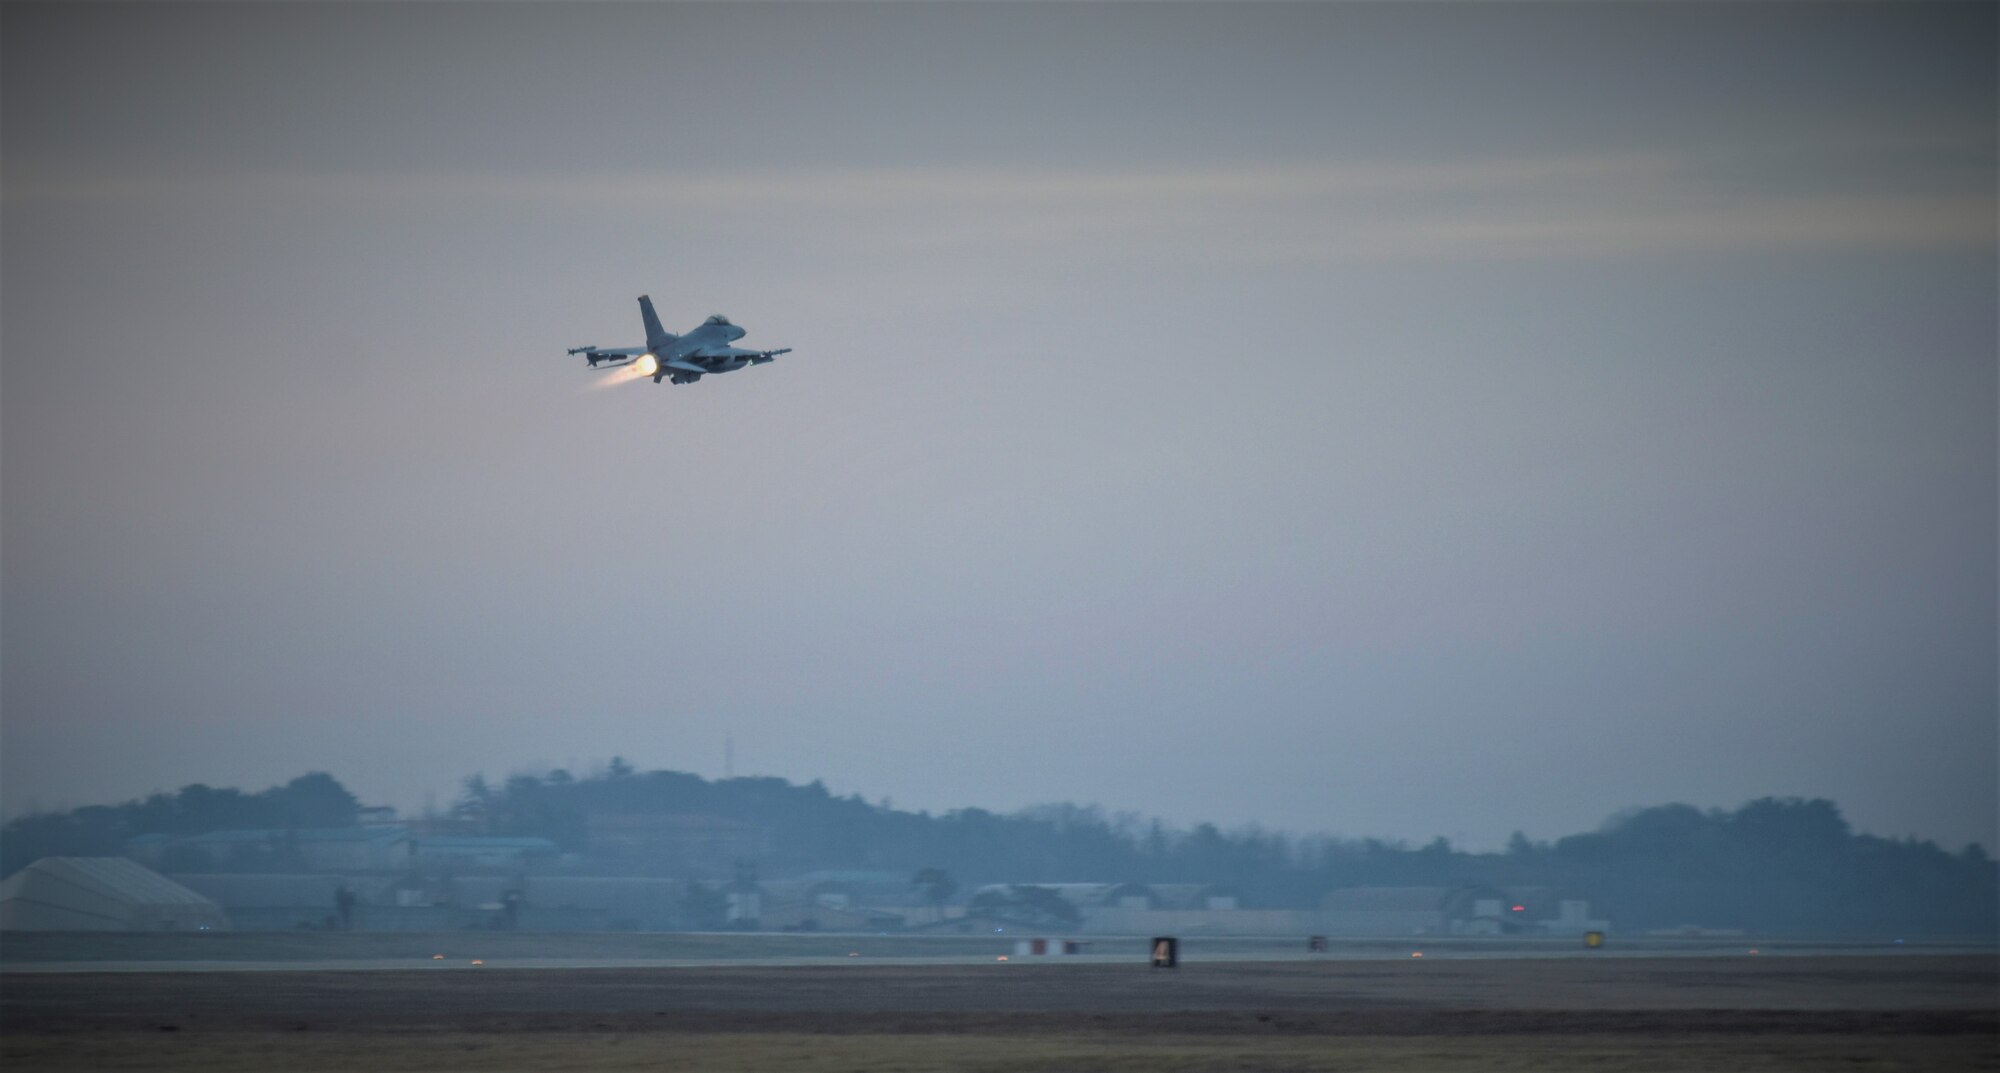 An 8th Fighter Wing F-16 Fighting Falcon takes off during a routine training event at Kunsan Air Base, Republic of Korea, March 24, 2021. The F-16 Fighting Falcon is a compact, multi-role fighter aircraft that is highly maneuverable in air-to-air combat and air-to-surface attack. It can reach top speeds of 1,500 mph and can reach altitudes of more than 50,000 feet. (U.S. Air Force photo by Tech. Sgt. Kristin S. High)